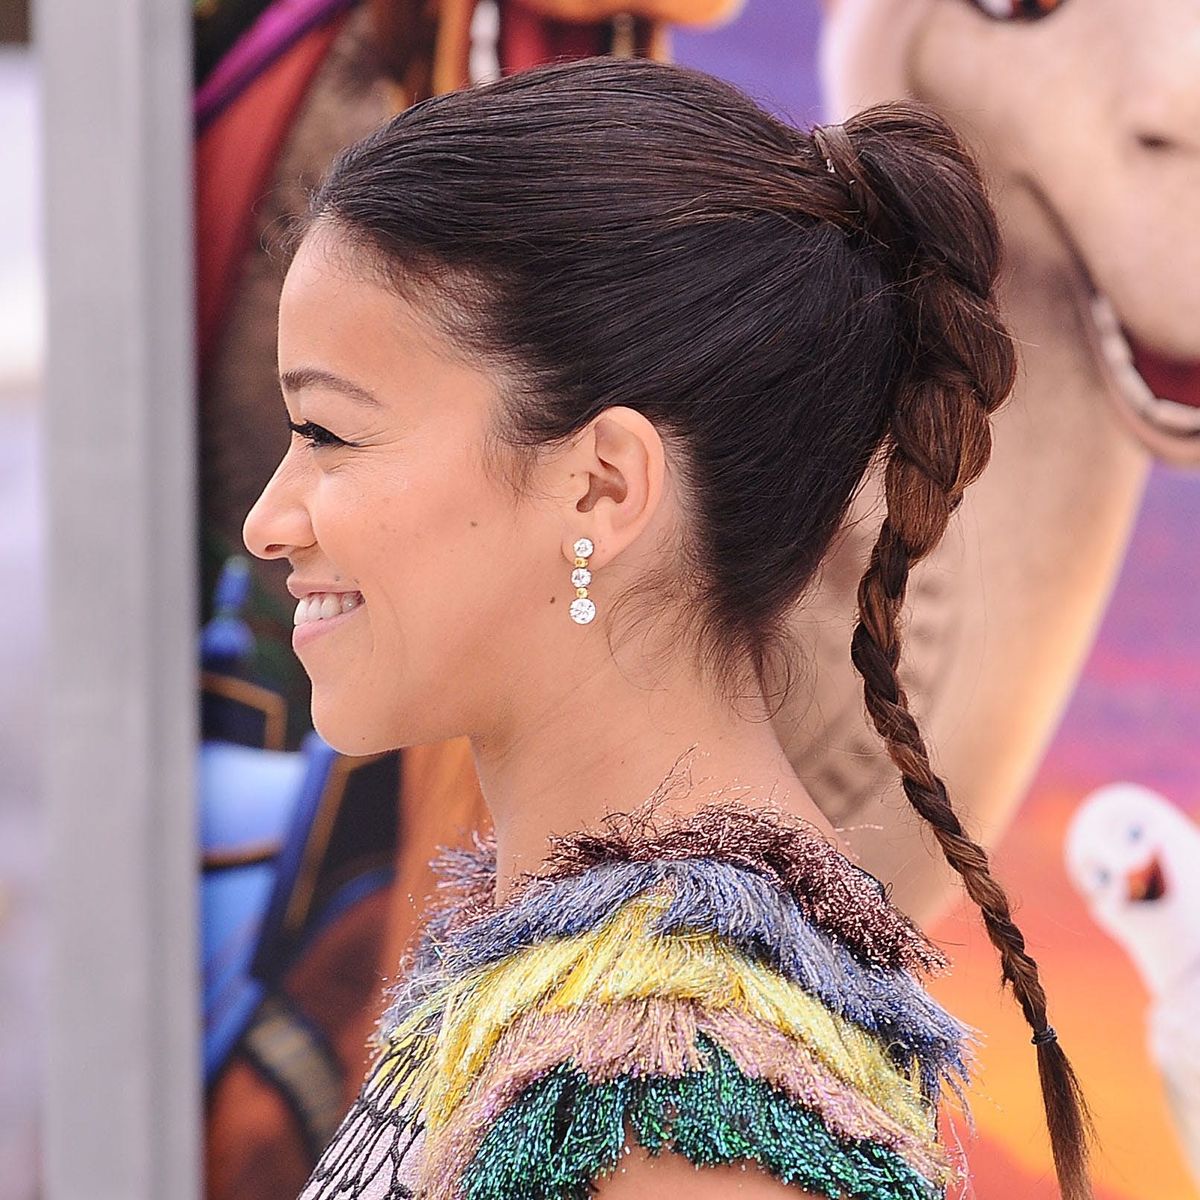 10 Celebrity Hairstyles That Prove Ponytails Are Perfect for Spring